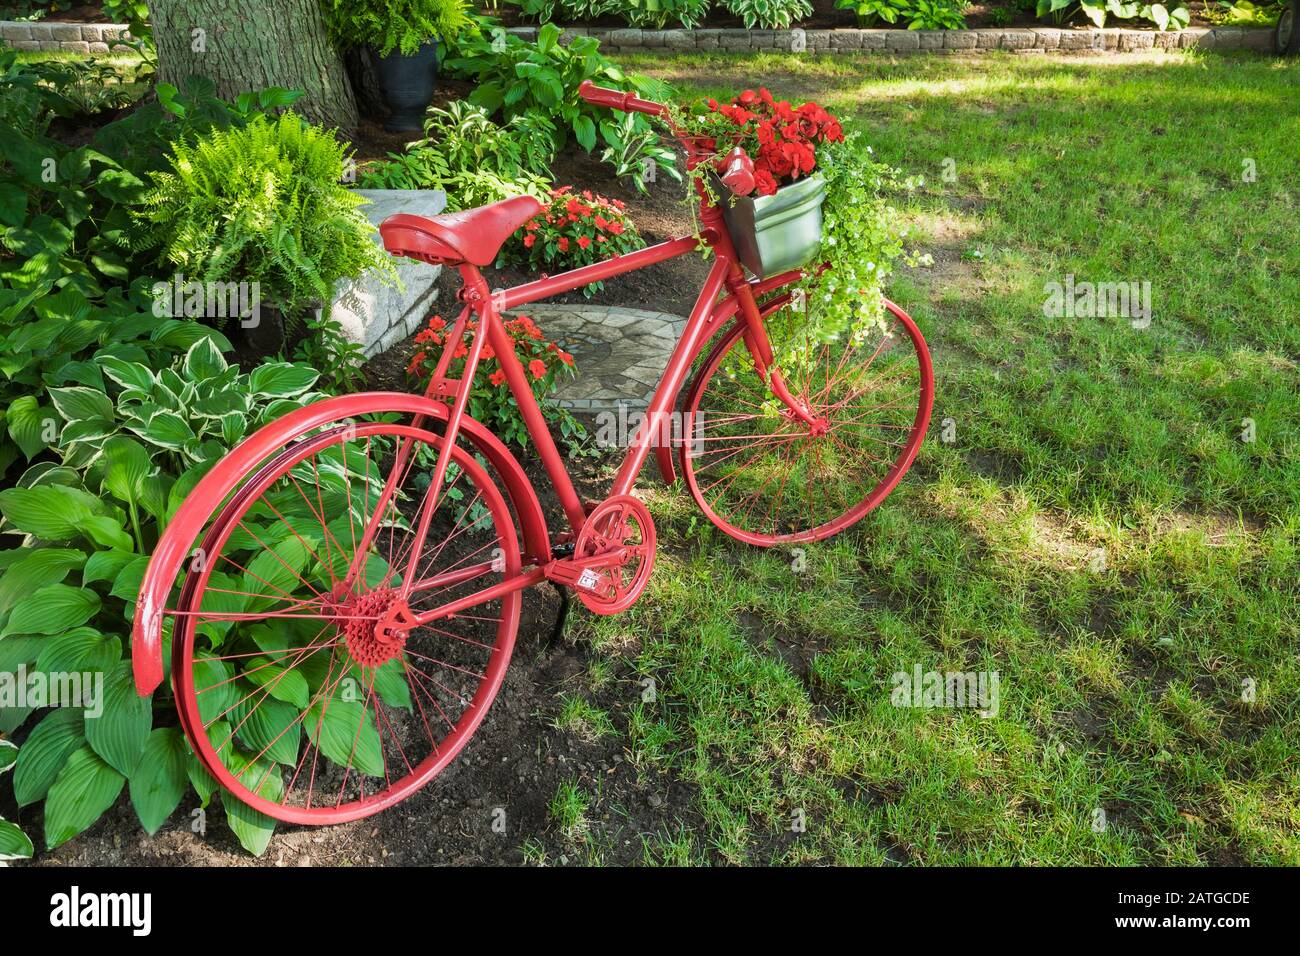 Red painted bicycle decorated with basket of red Begonia flowers, Bacopa - Water hyssop next to border of Hosta, Adiantum - Maidenhair ferns. Stock Photo